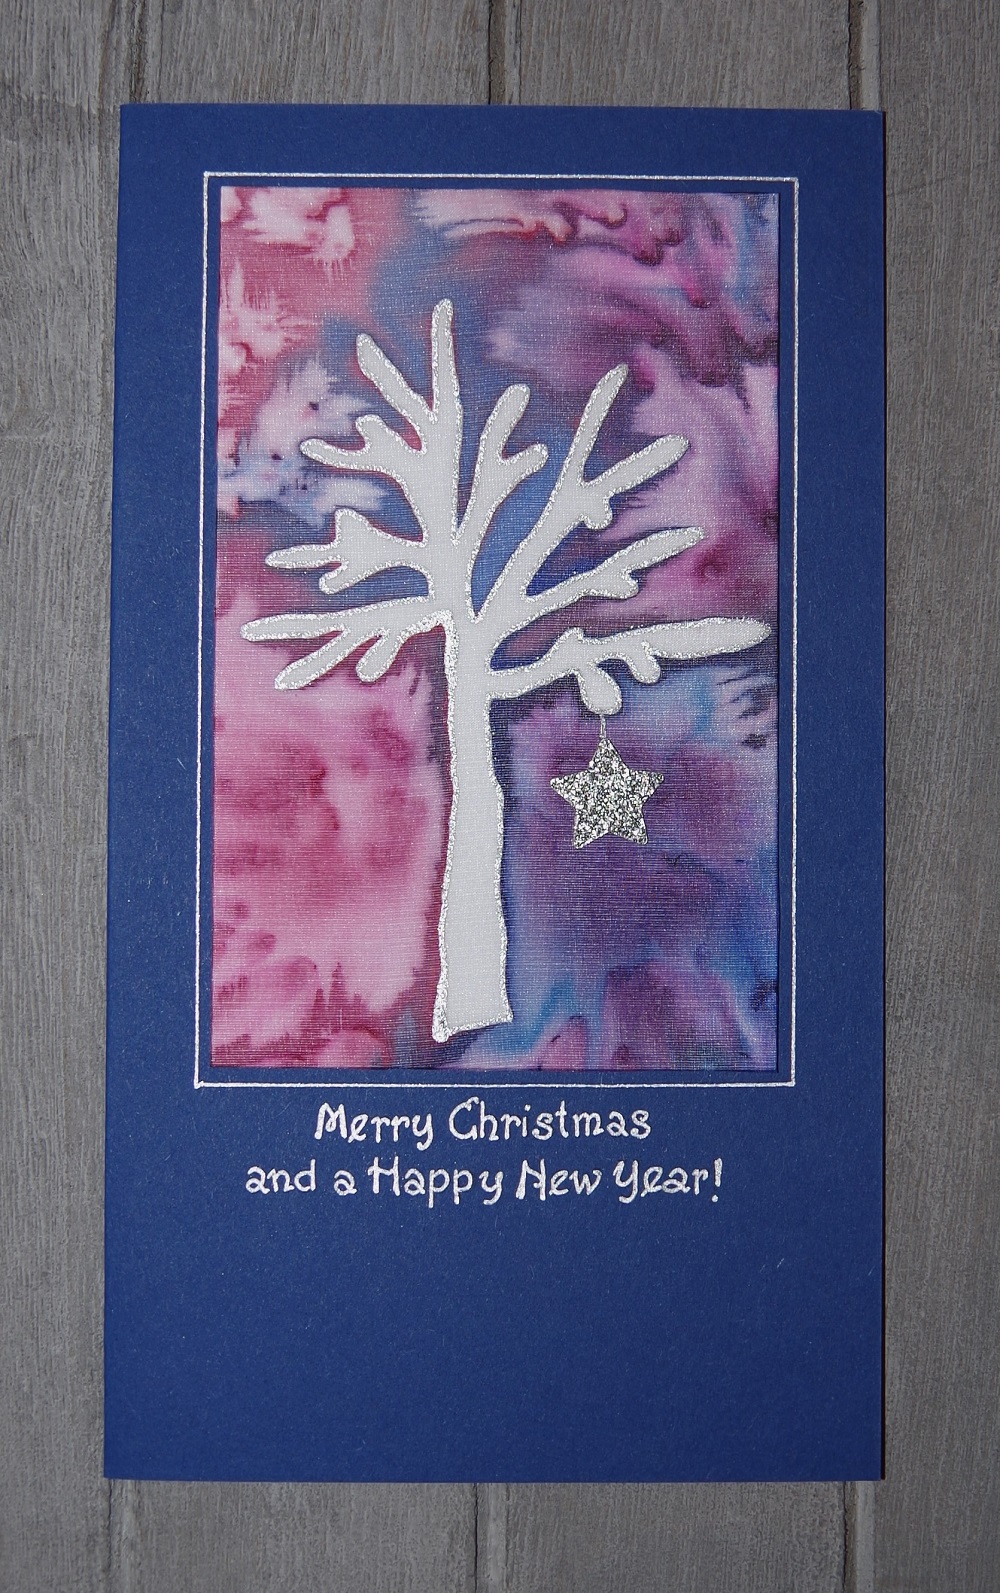 Merry Christmas and a Happy New Year! Silk painting.